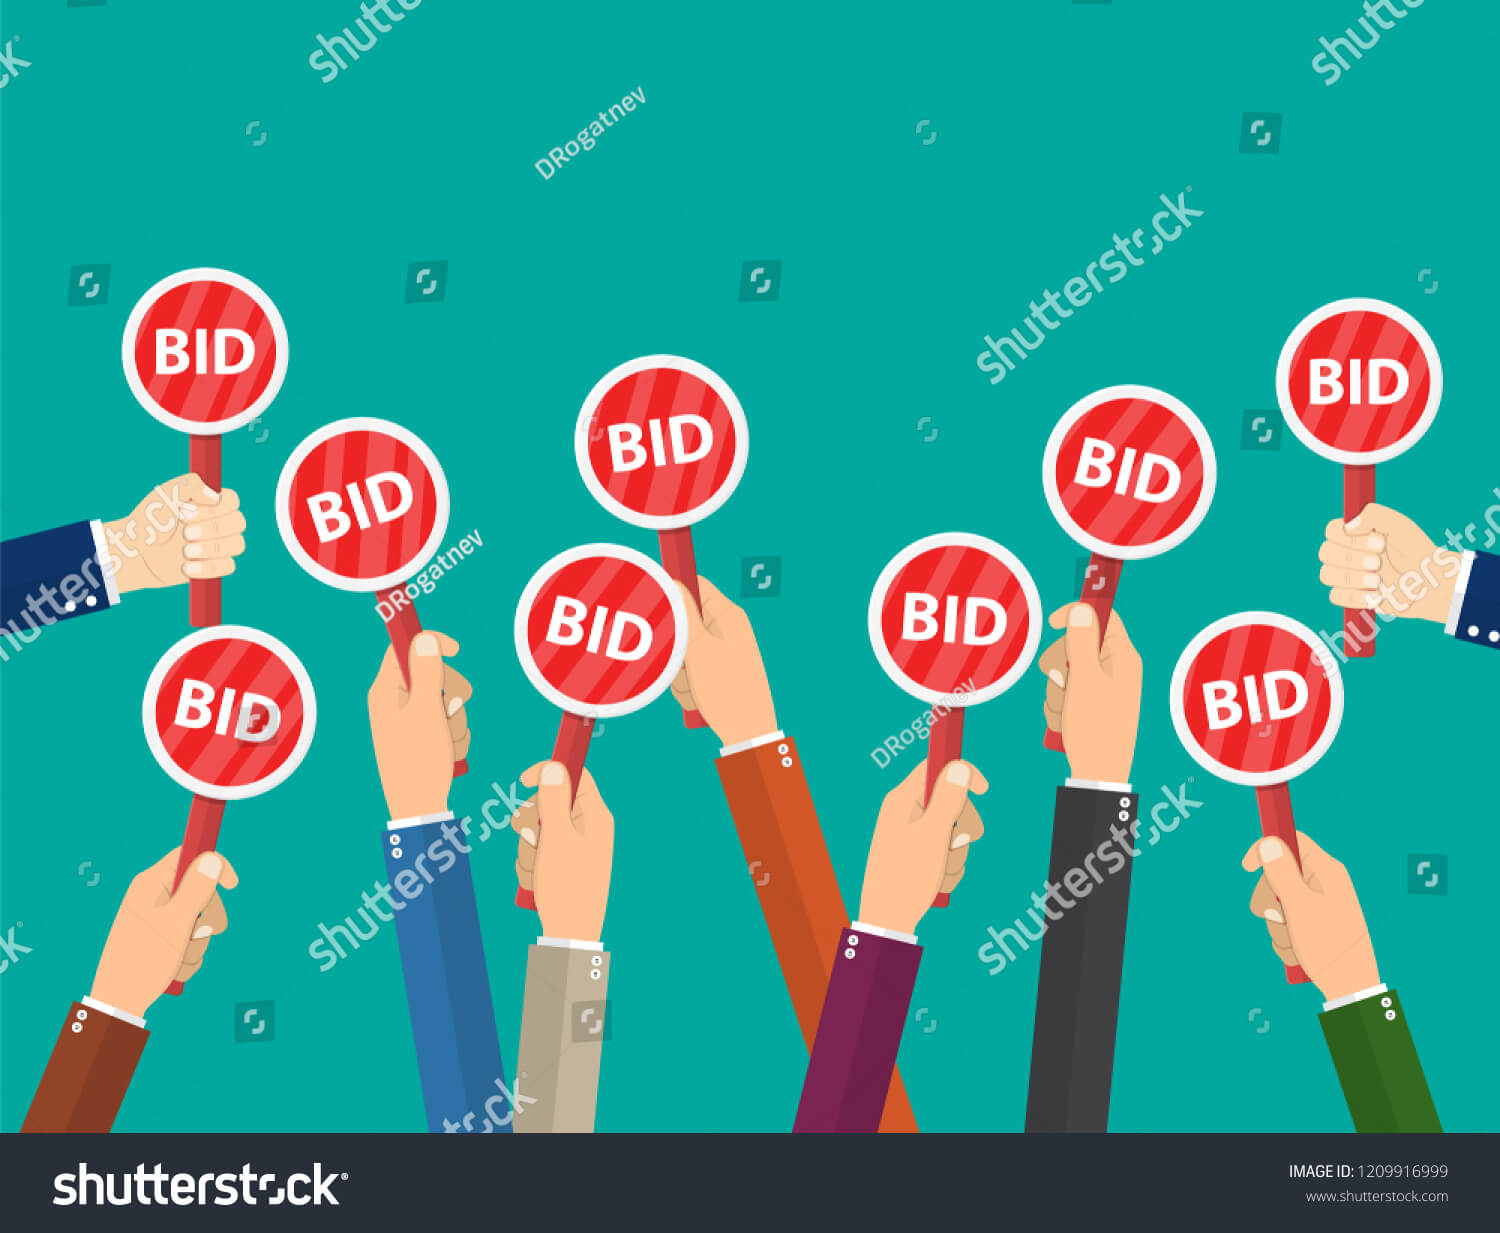 Hand Hold Paddle Bid Auction Meeting Stock Illustration In Auction Bid Cards Template